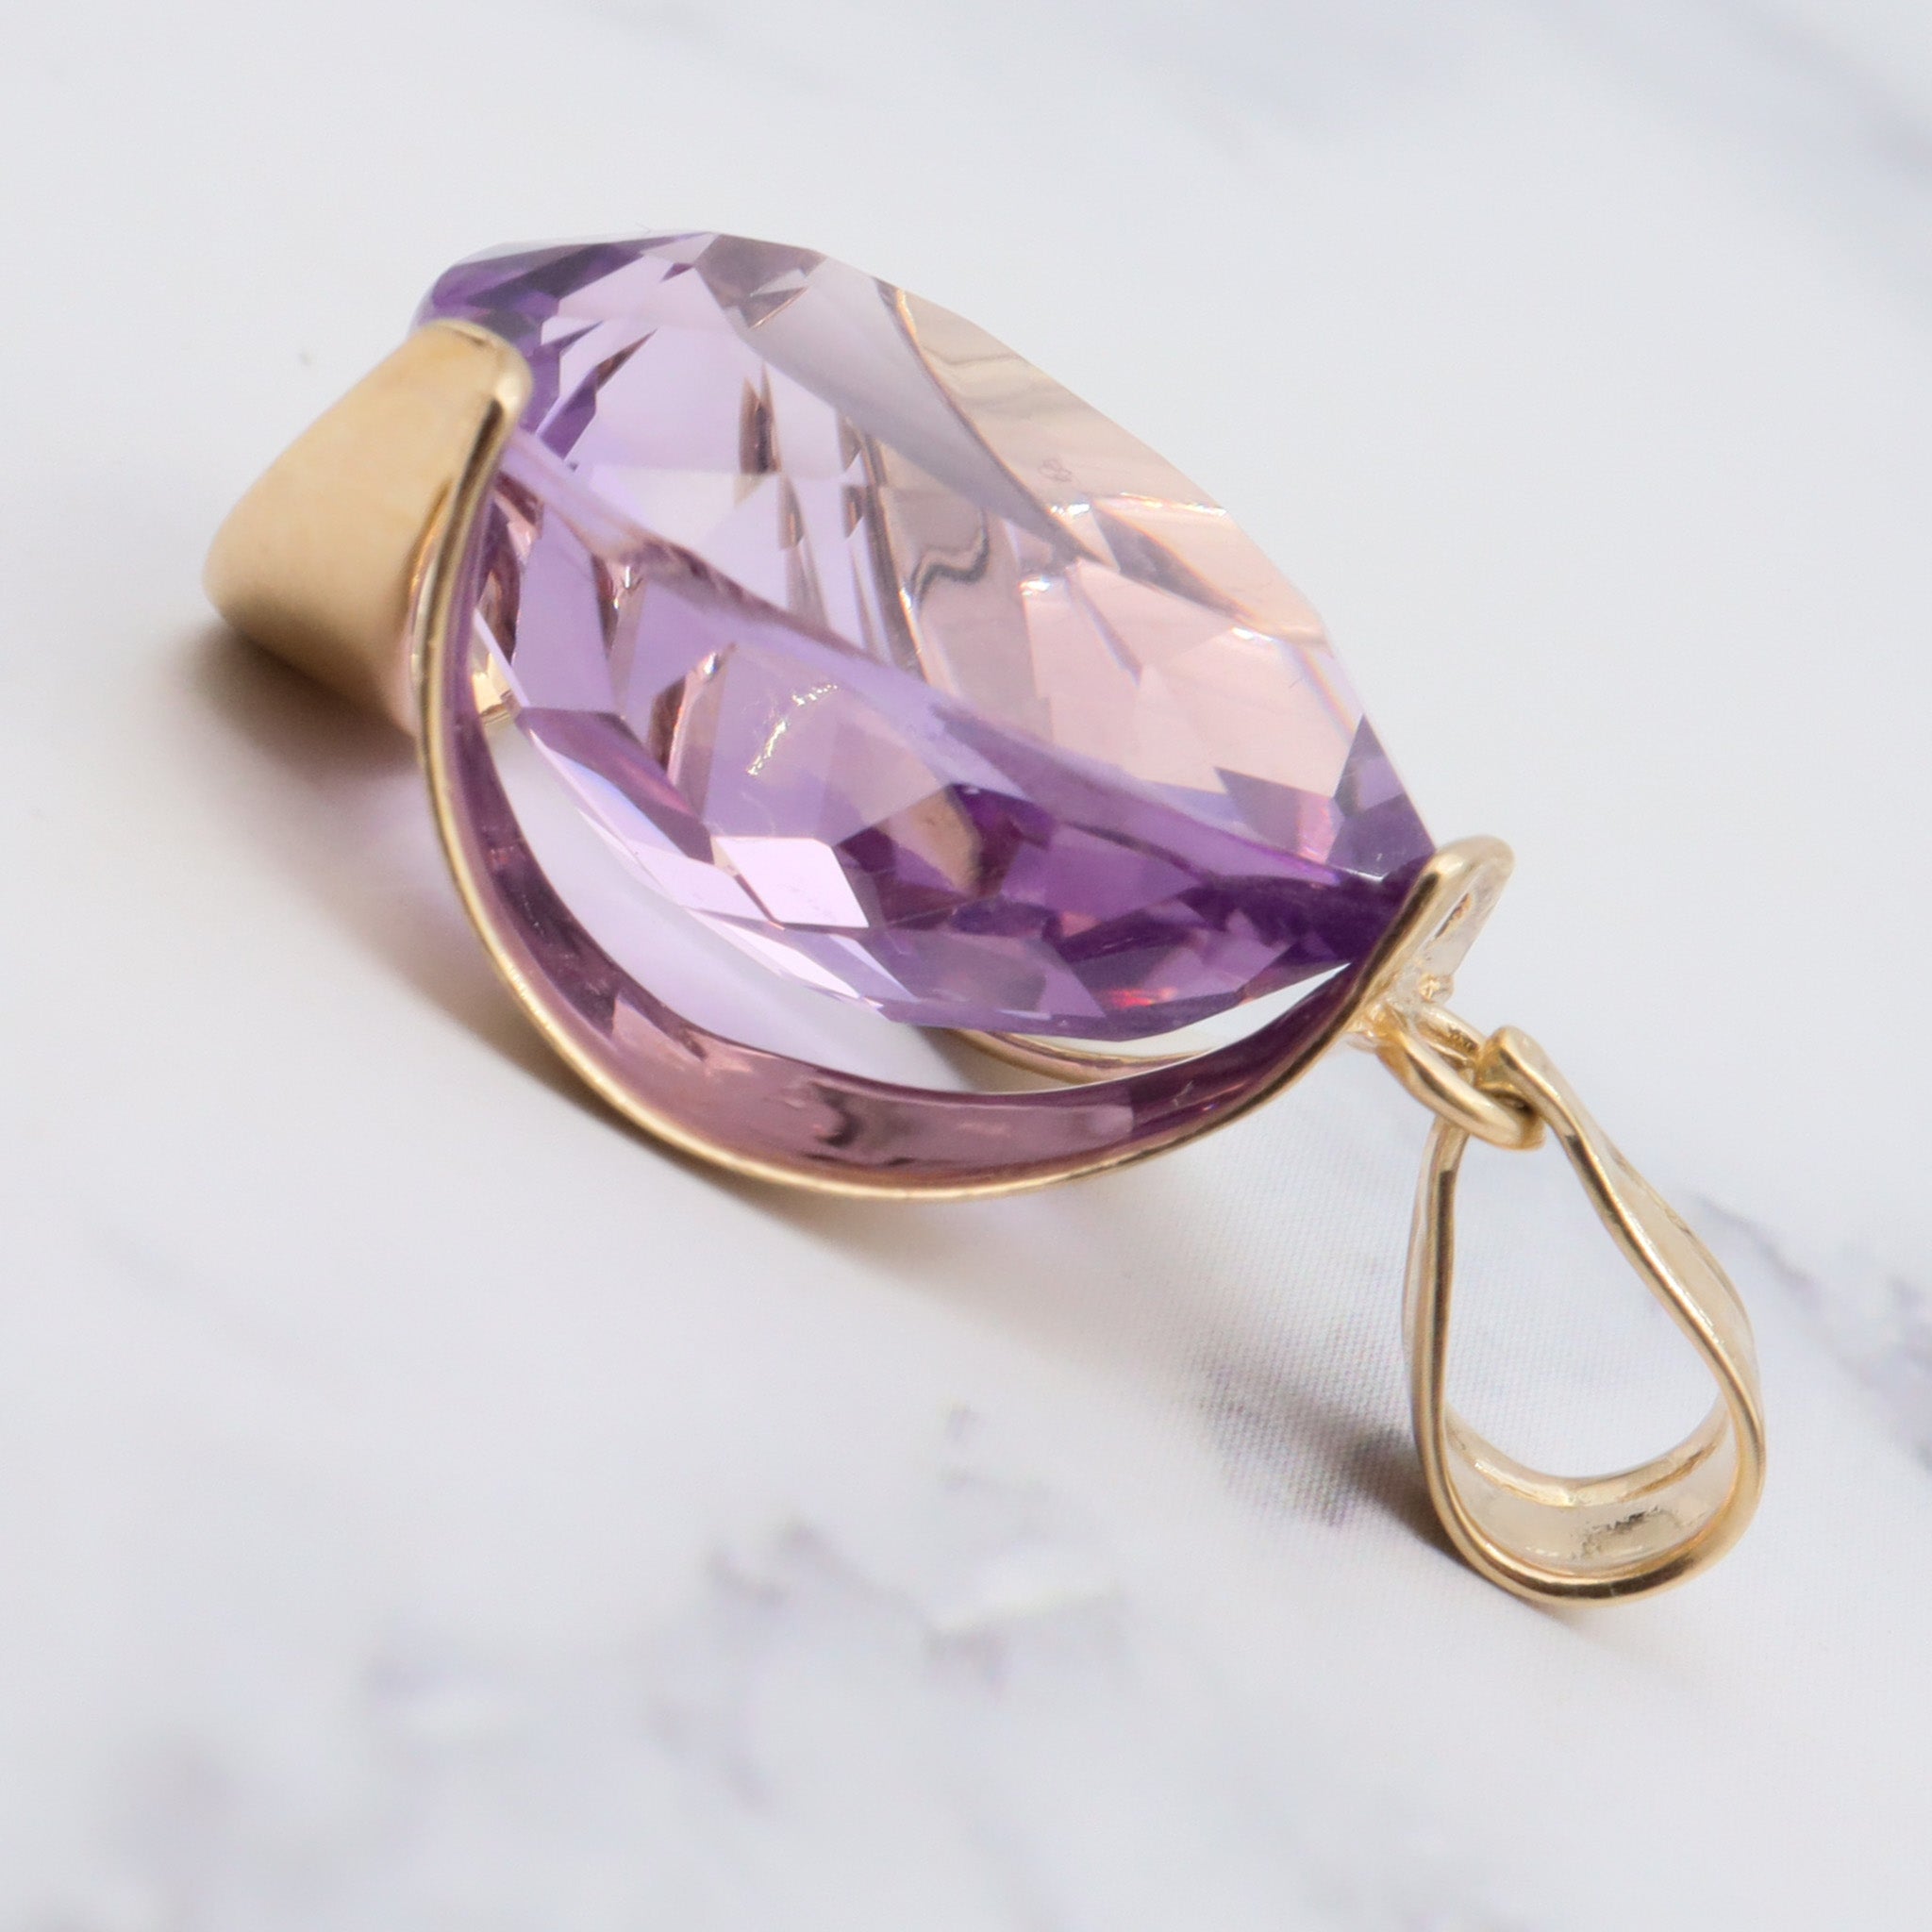 Vintage 14K gold and faceted pear amethyst pendant